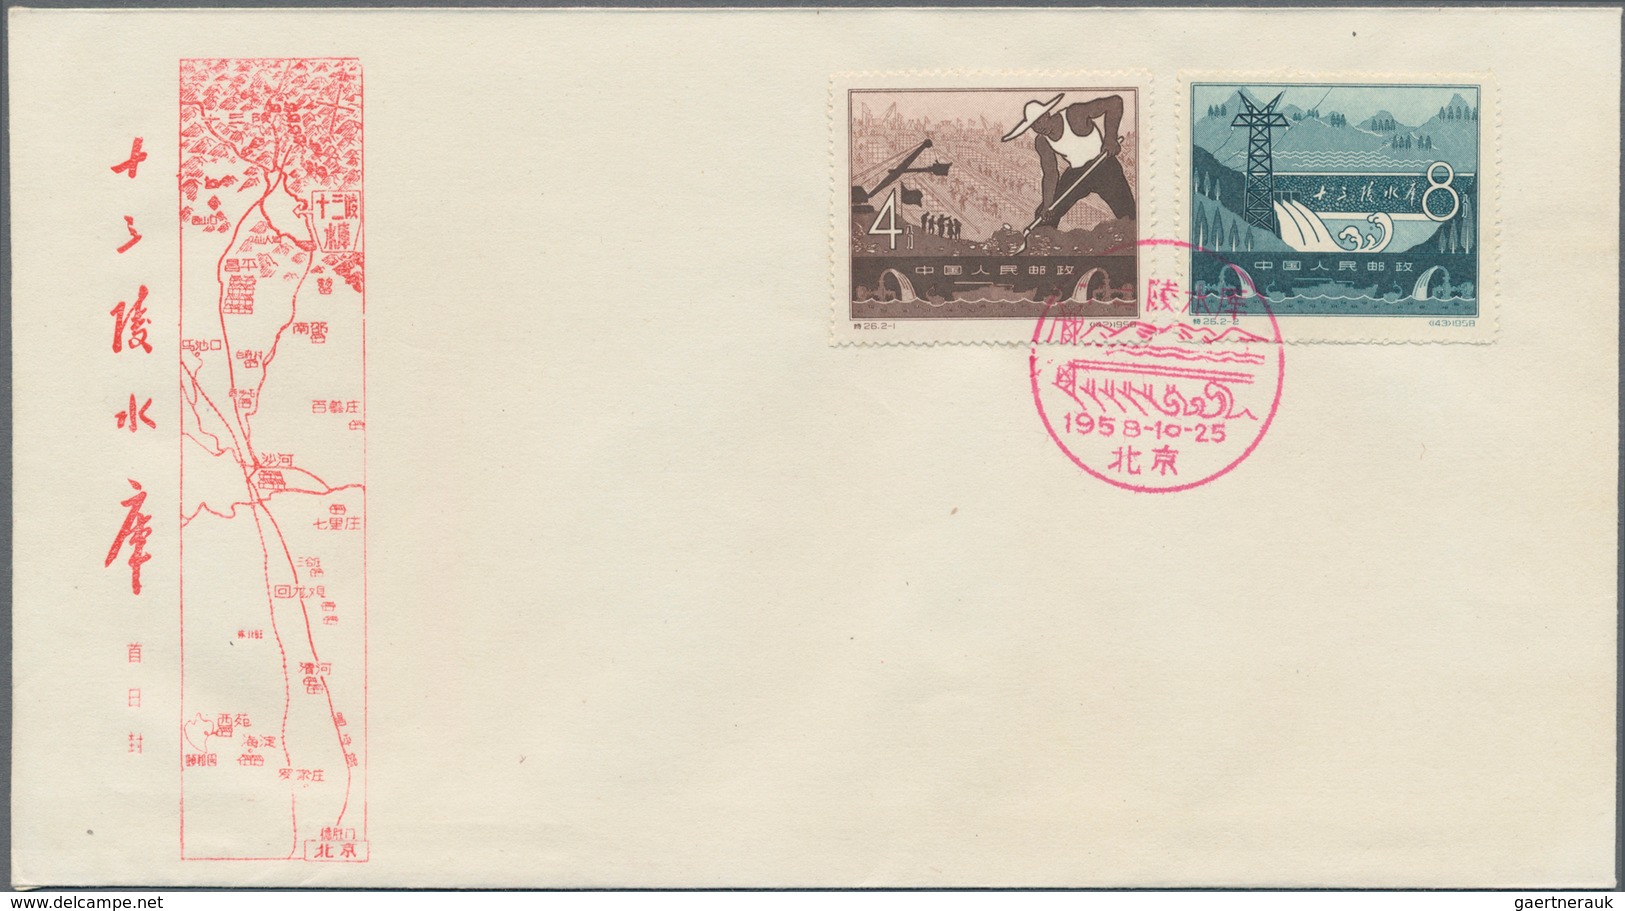 China - Volksrepublik: 1958, 5 FDCs, bearing Michel 398/409 (C54, C55, C56, S25, S26), tied by first